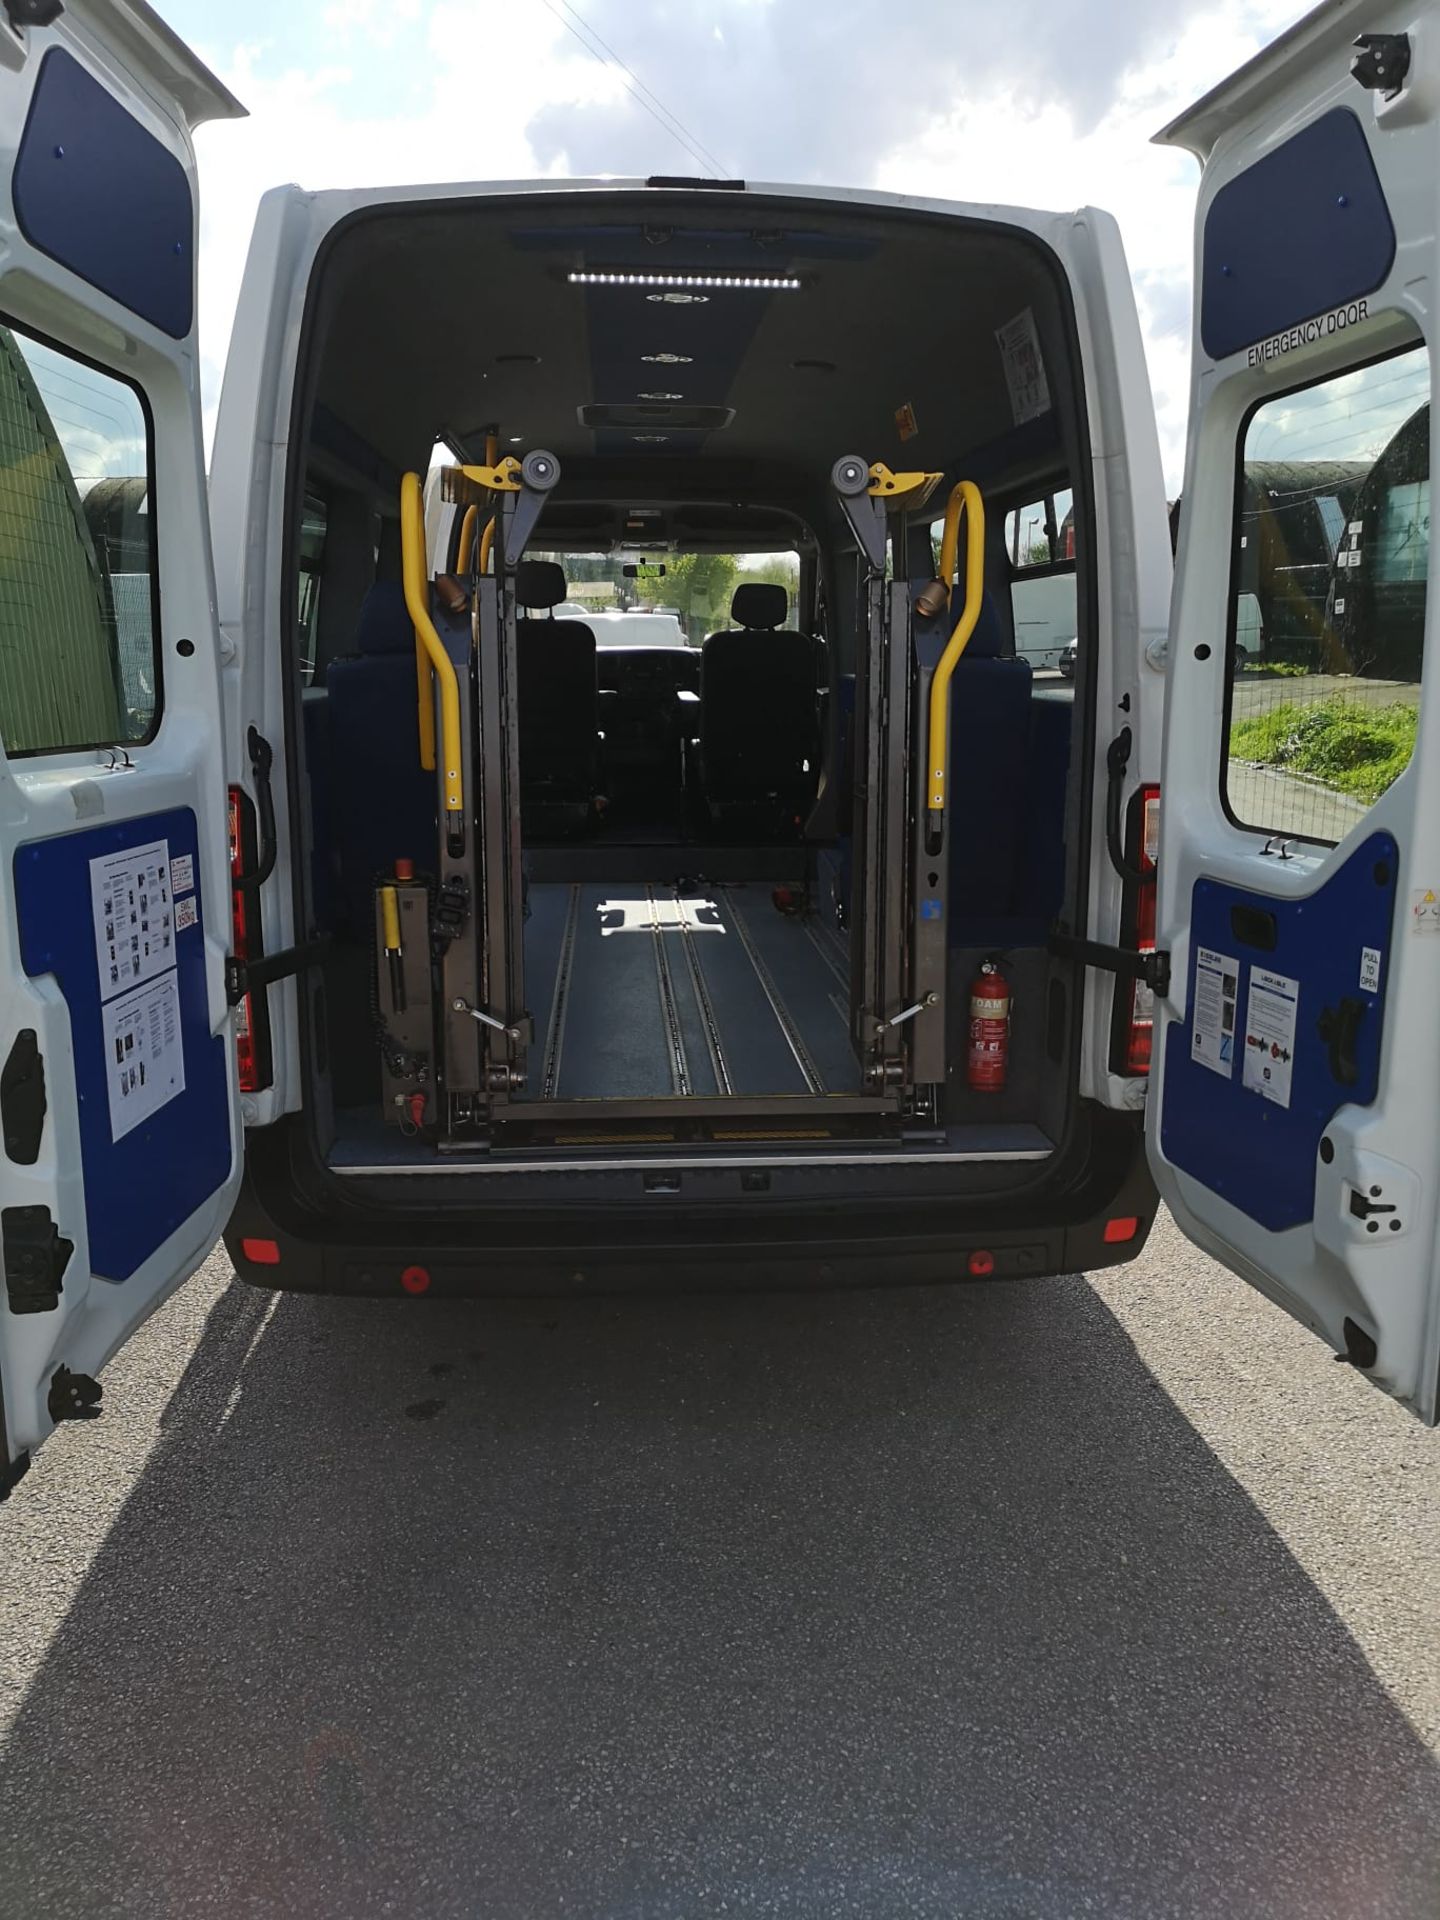 2015/15 REG RENAULT MASTER LM35 DCI 100 2.2 DIESEL MANUAL VAN WITH DISABLED RAMP REAR ACCESS *NO VAT - Image 9 of 20